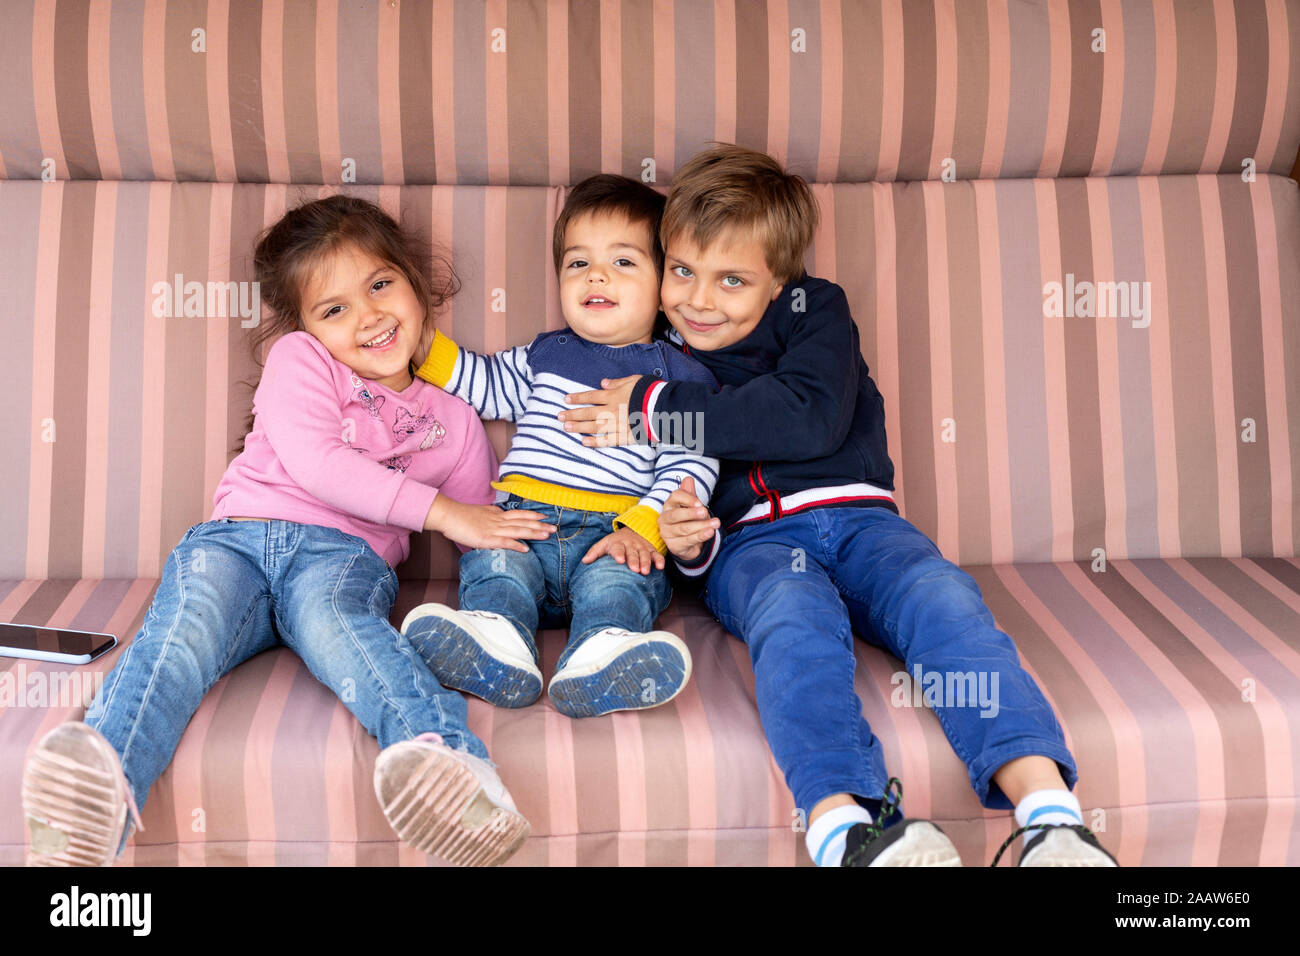 Portrait of three siblings sitting side by side Stock Photo